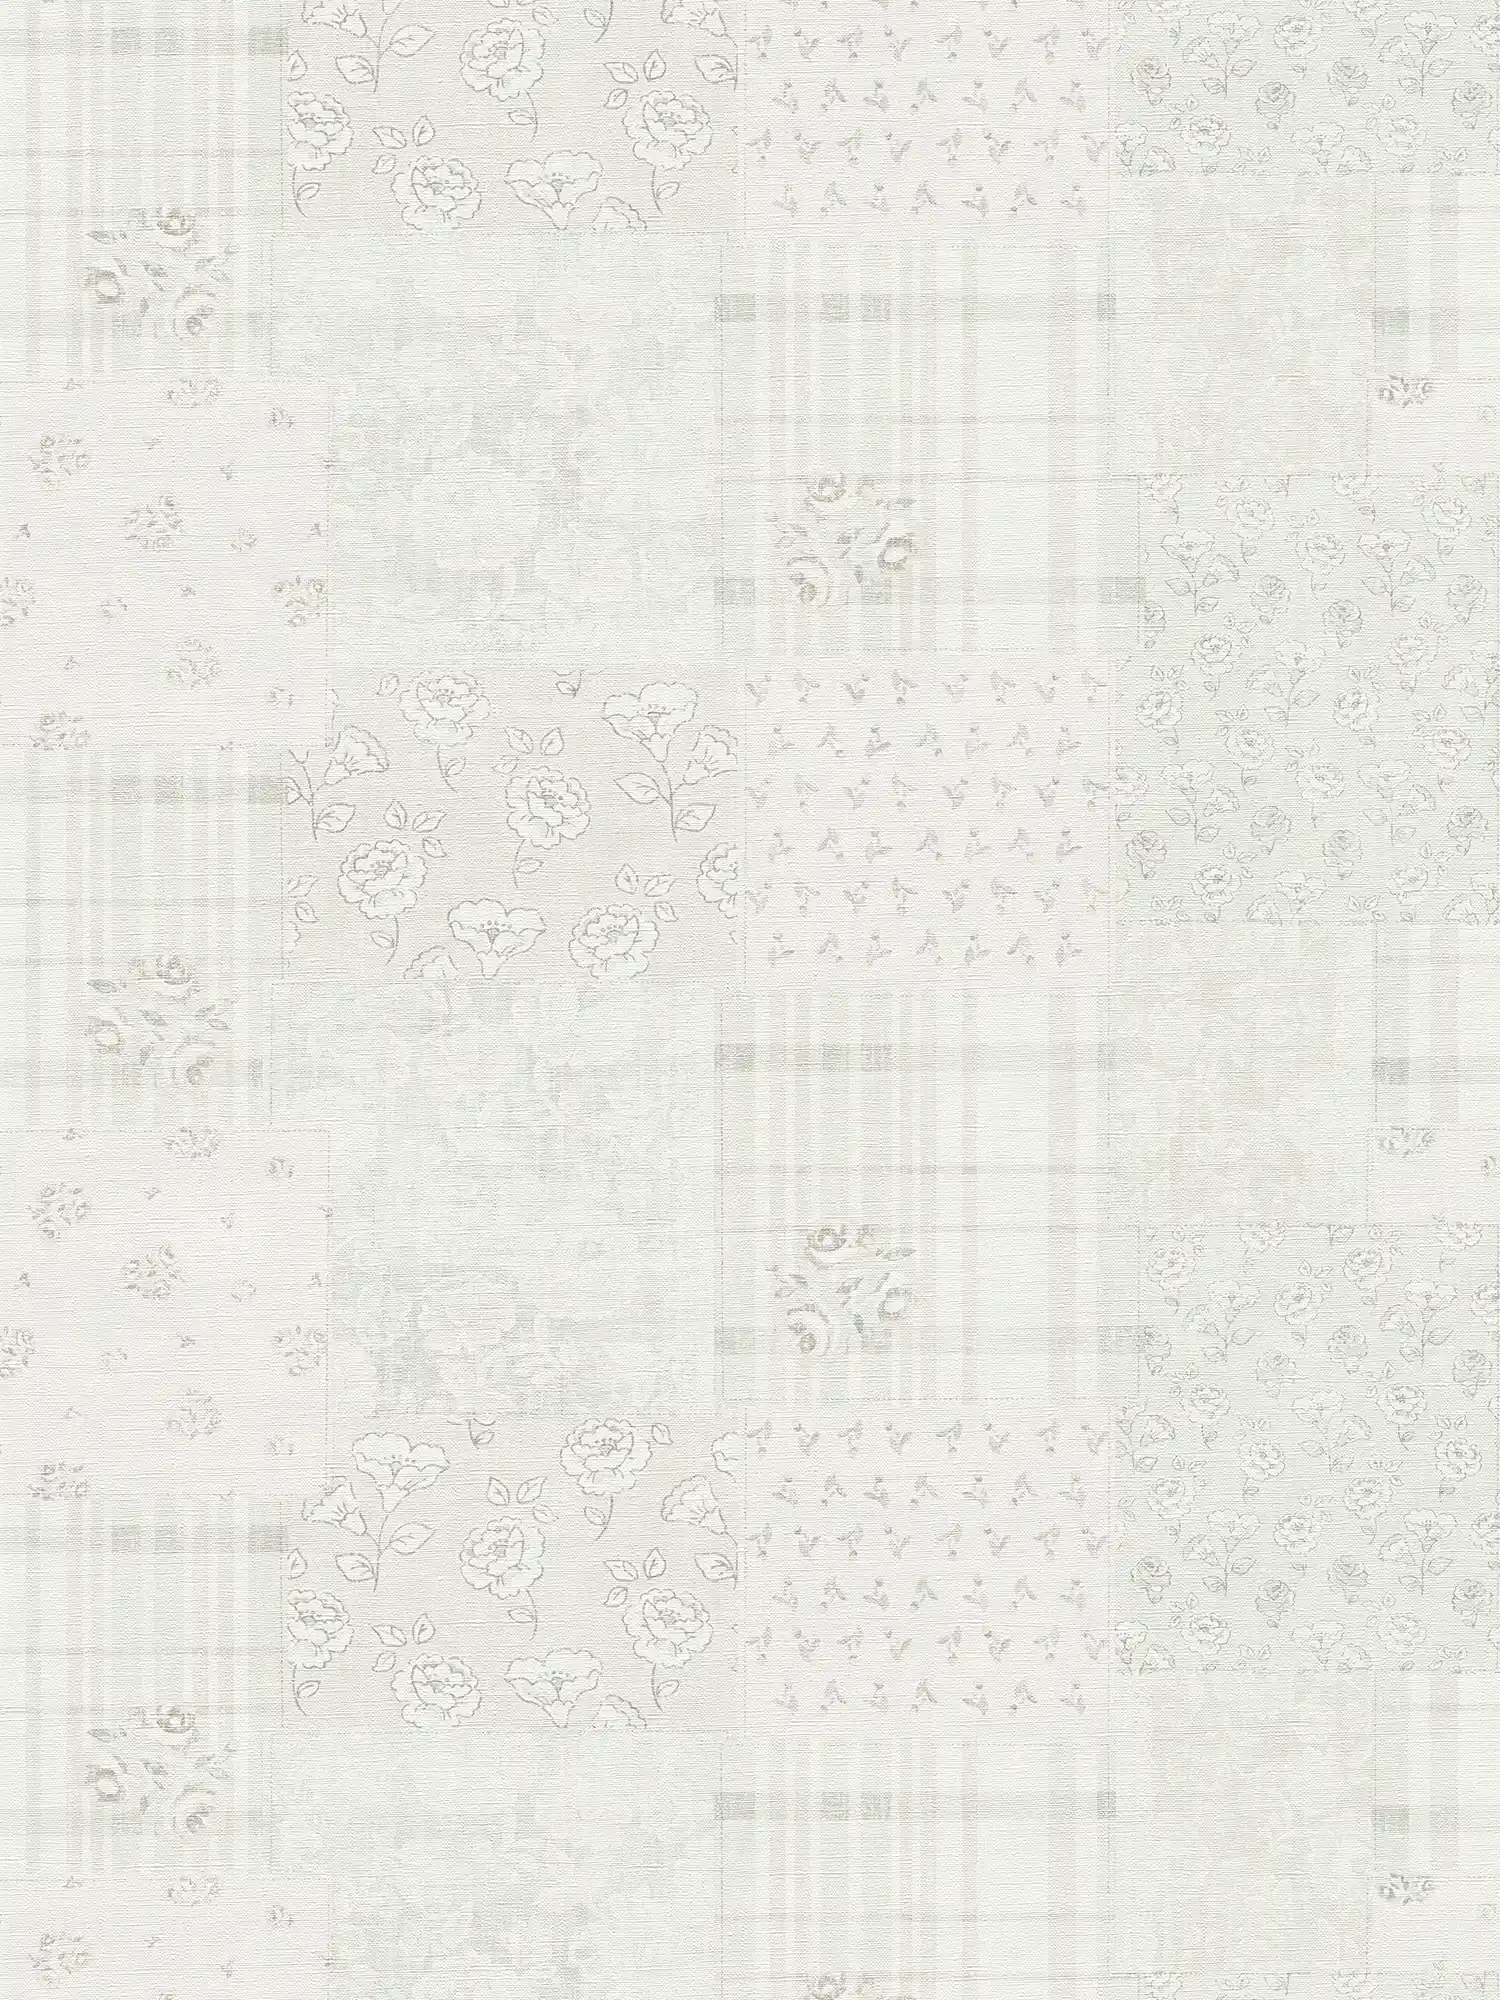             Non-woven wallpaper with floral pattern country style - grey, white
        